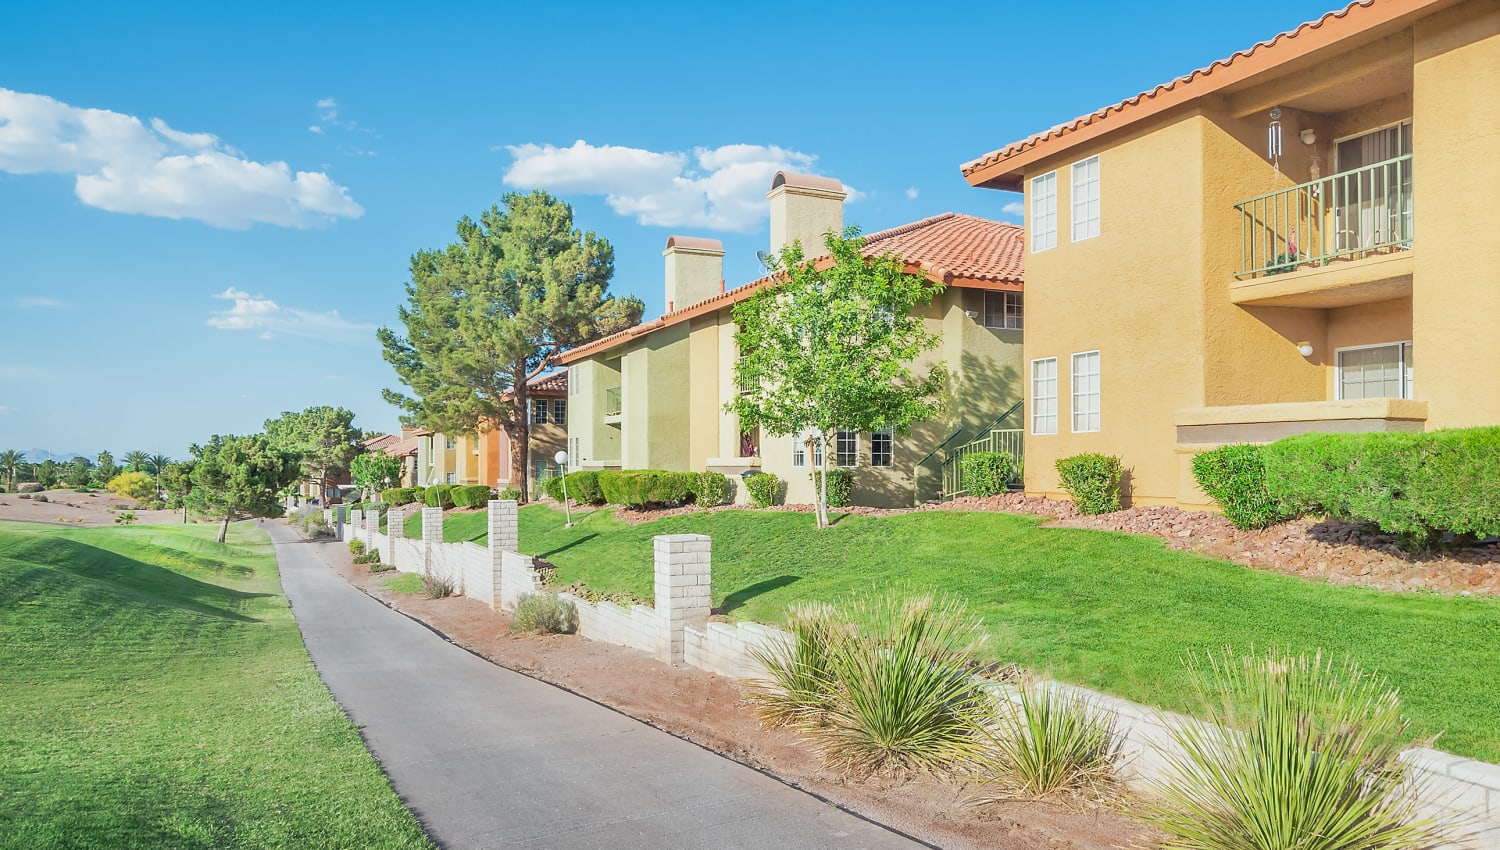 Golf course and exterior view of apartments at Invitational Apartments in Henderson, Nevada